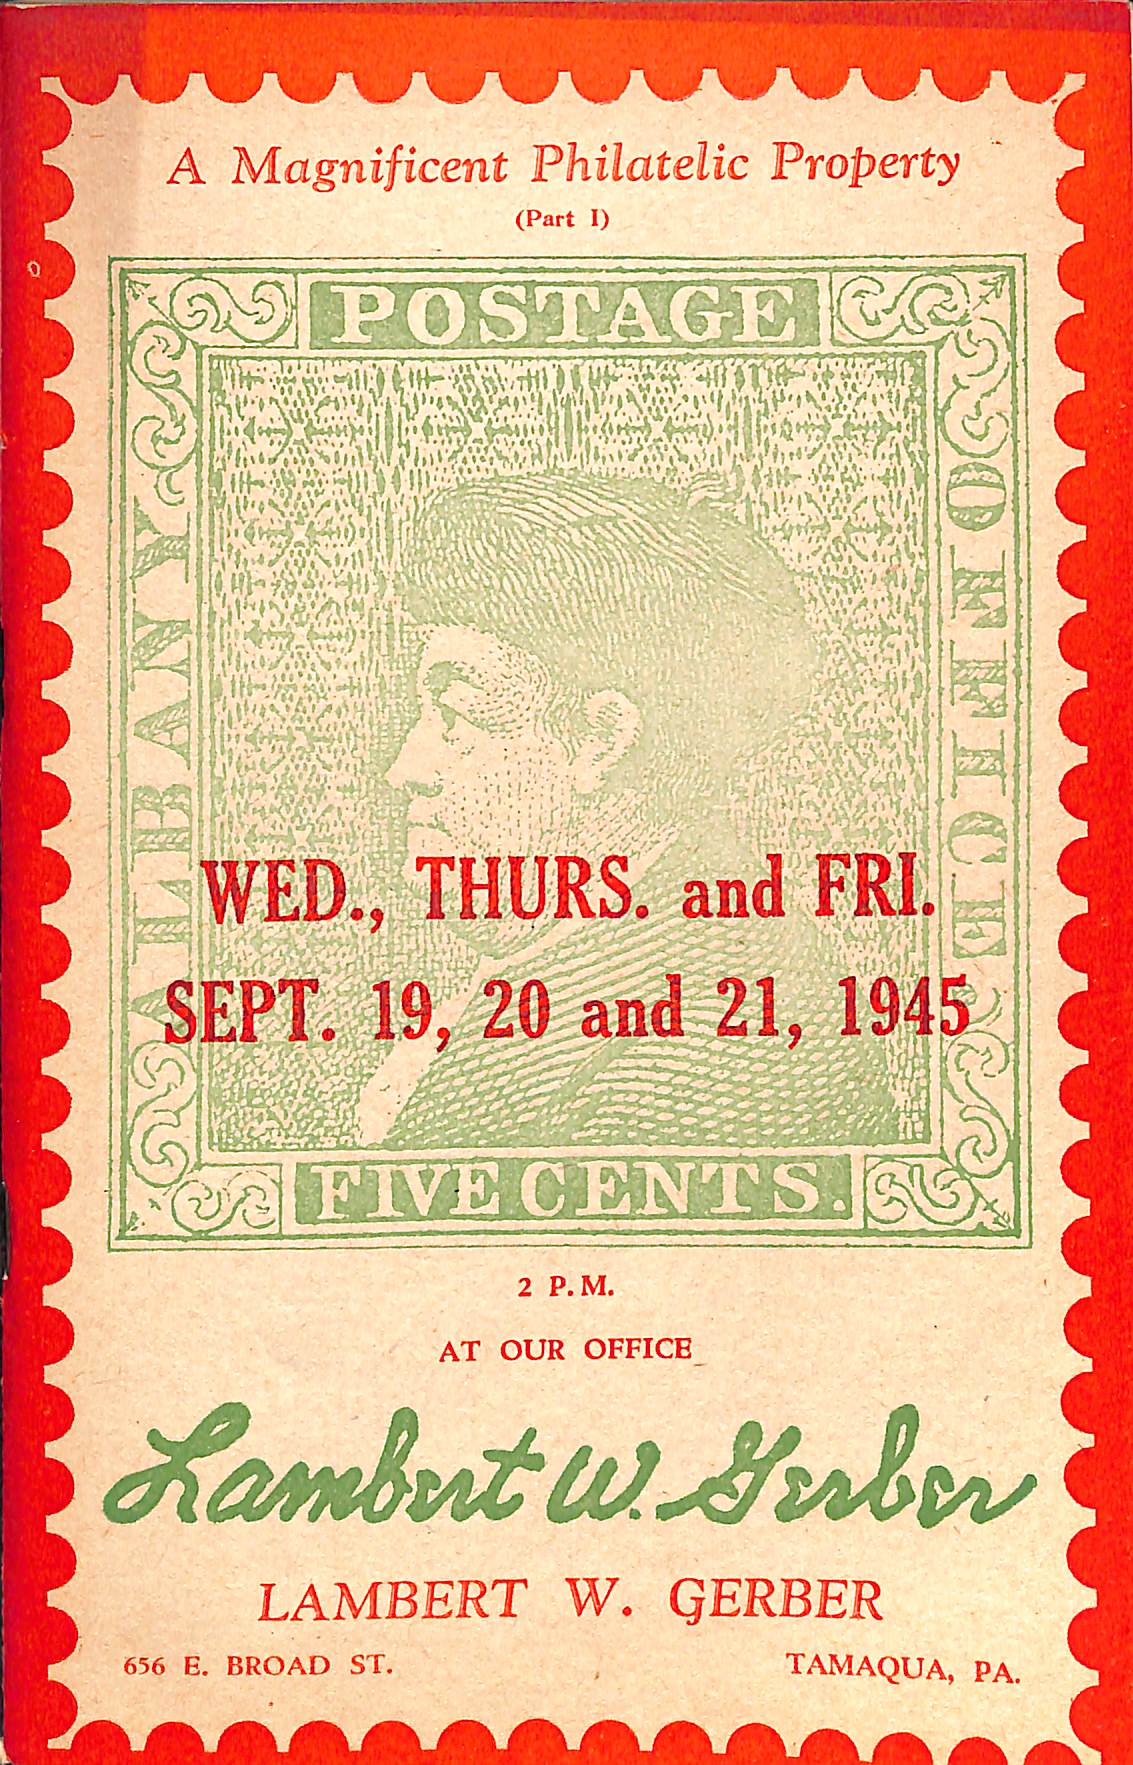 "A Magnificent Philatelic Property: Part 1" - September 19-21, 1945